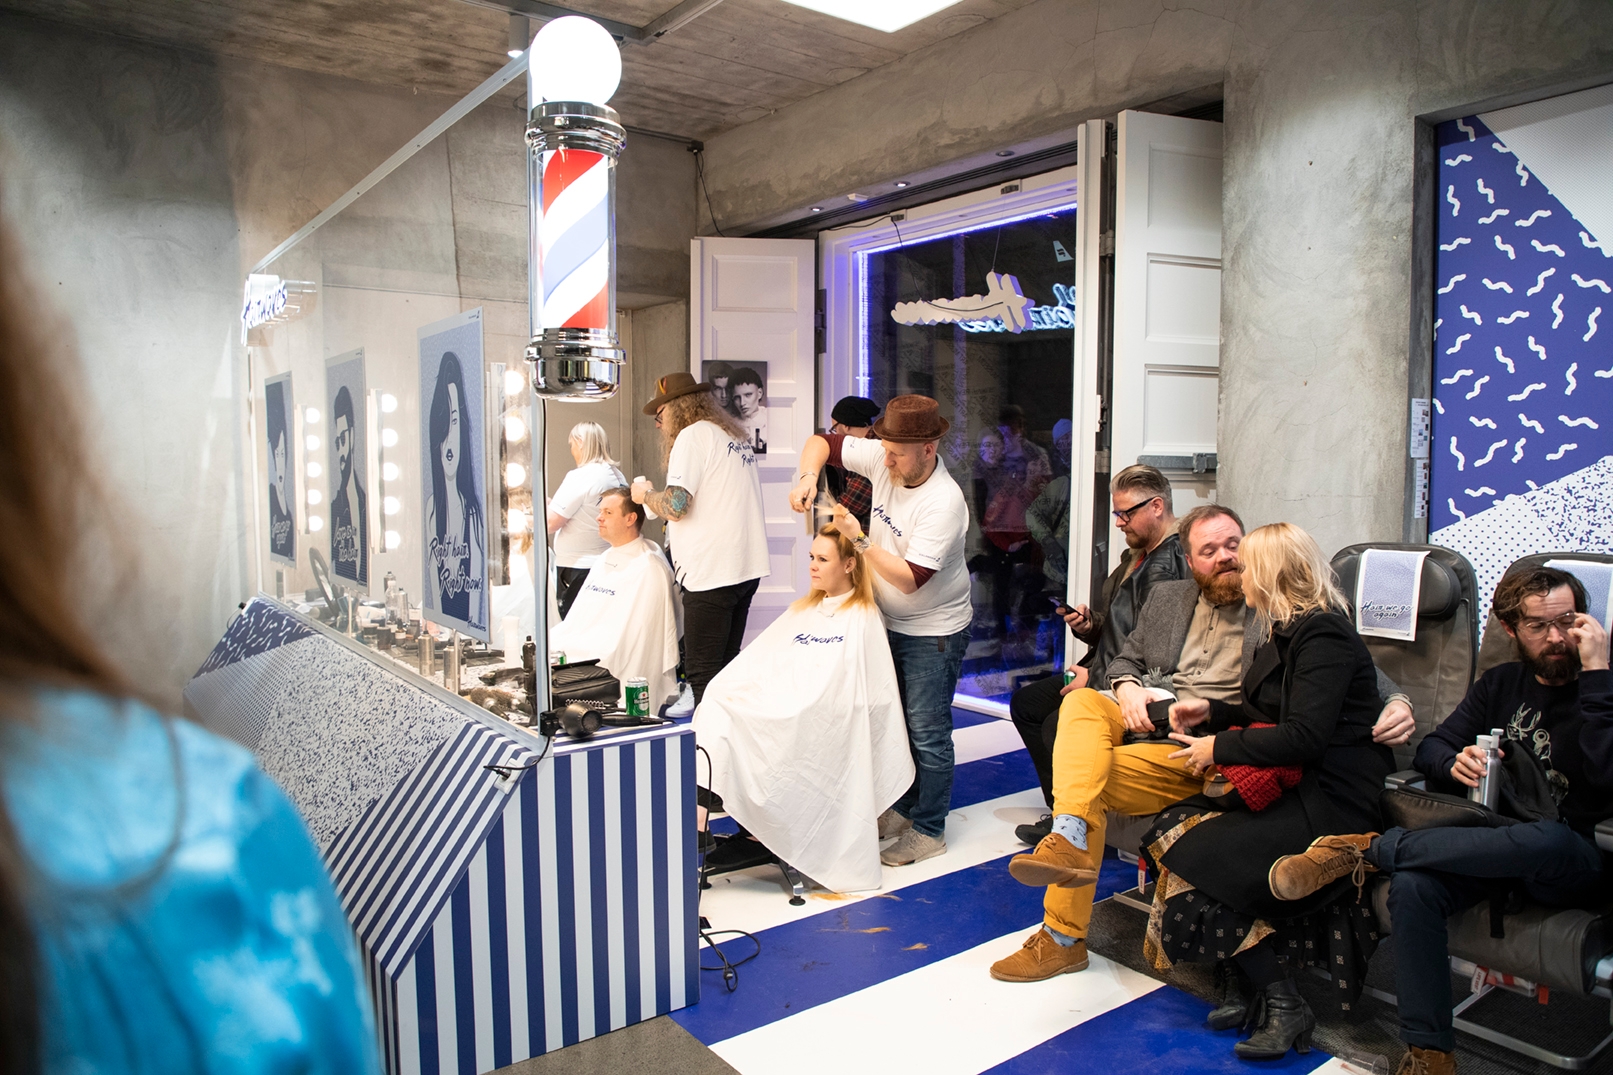 Hairdressers wearing white t-shirts that read 'Hairwaves' cut the hair of people sitting facing mirrors in the hair salon at Iceland Airwaves